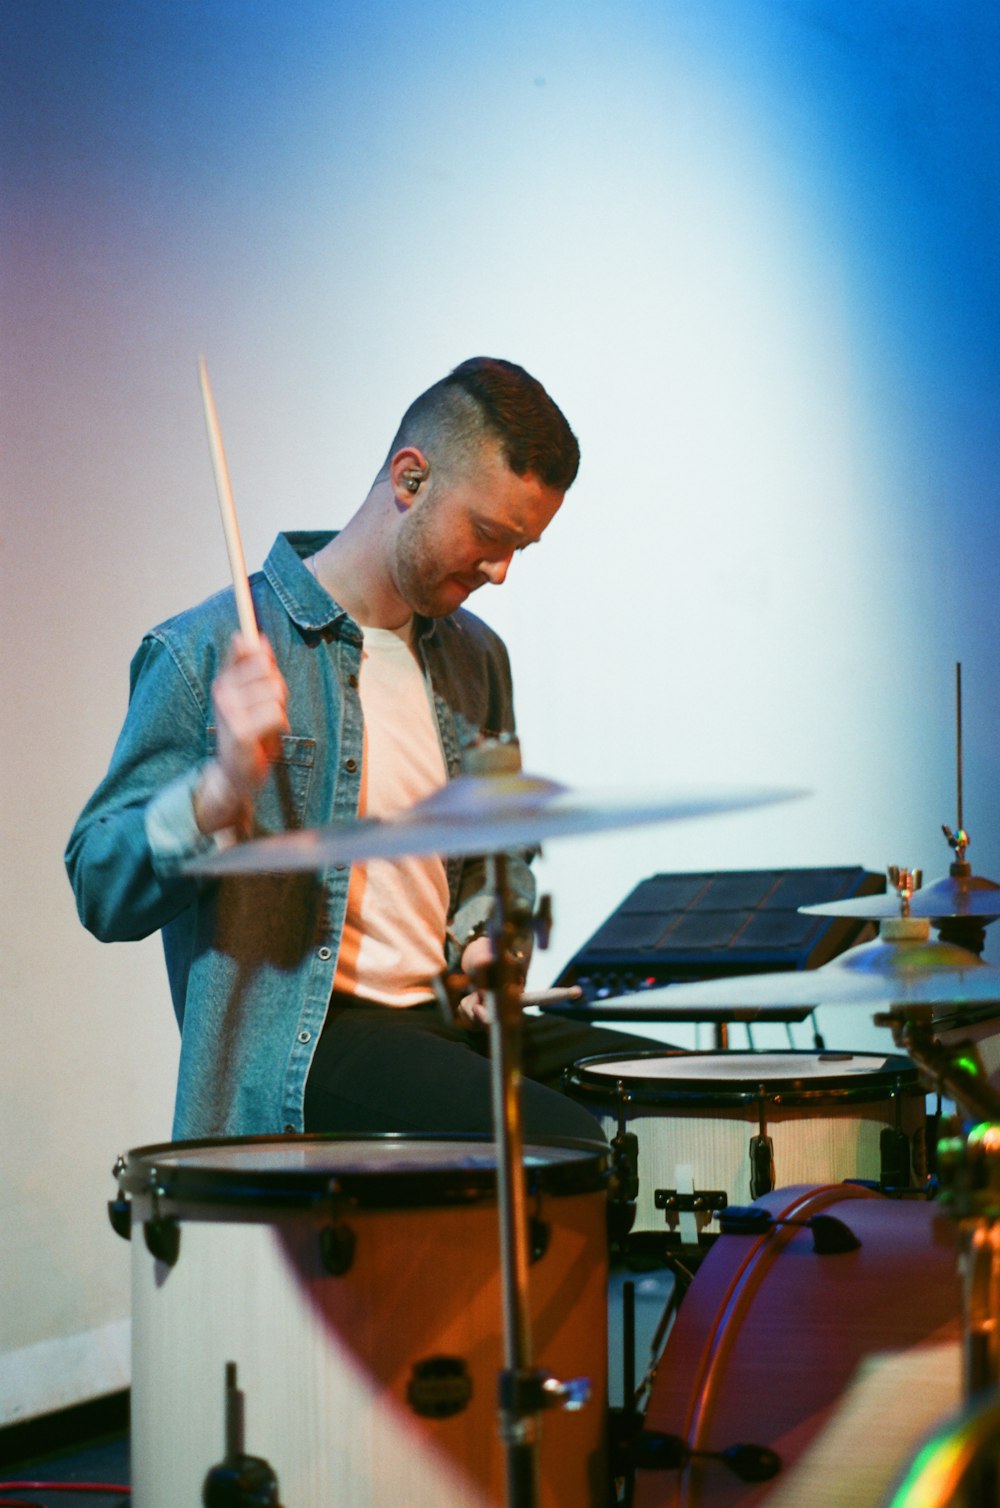 man about to strike drumstick on the drums